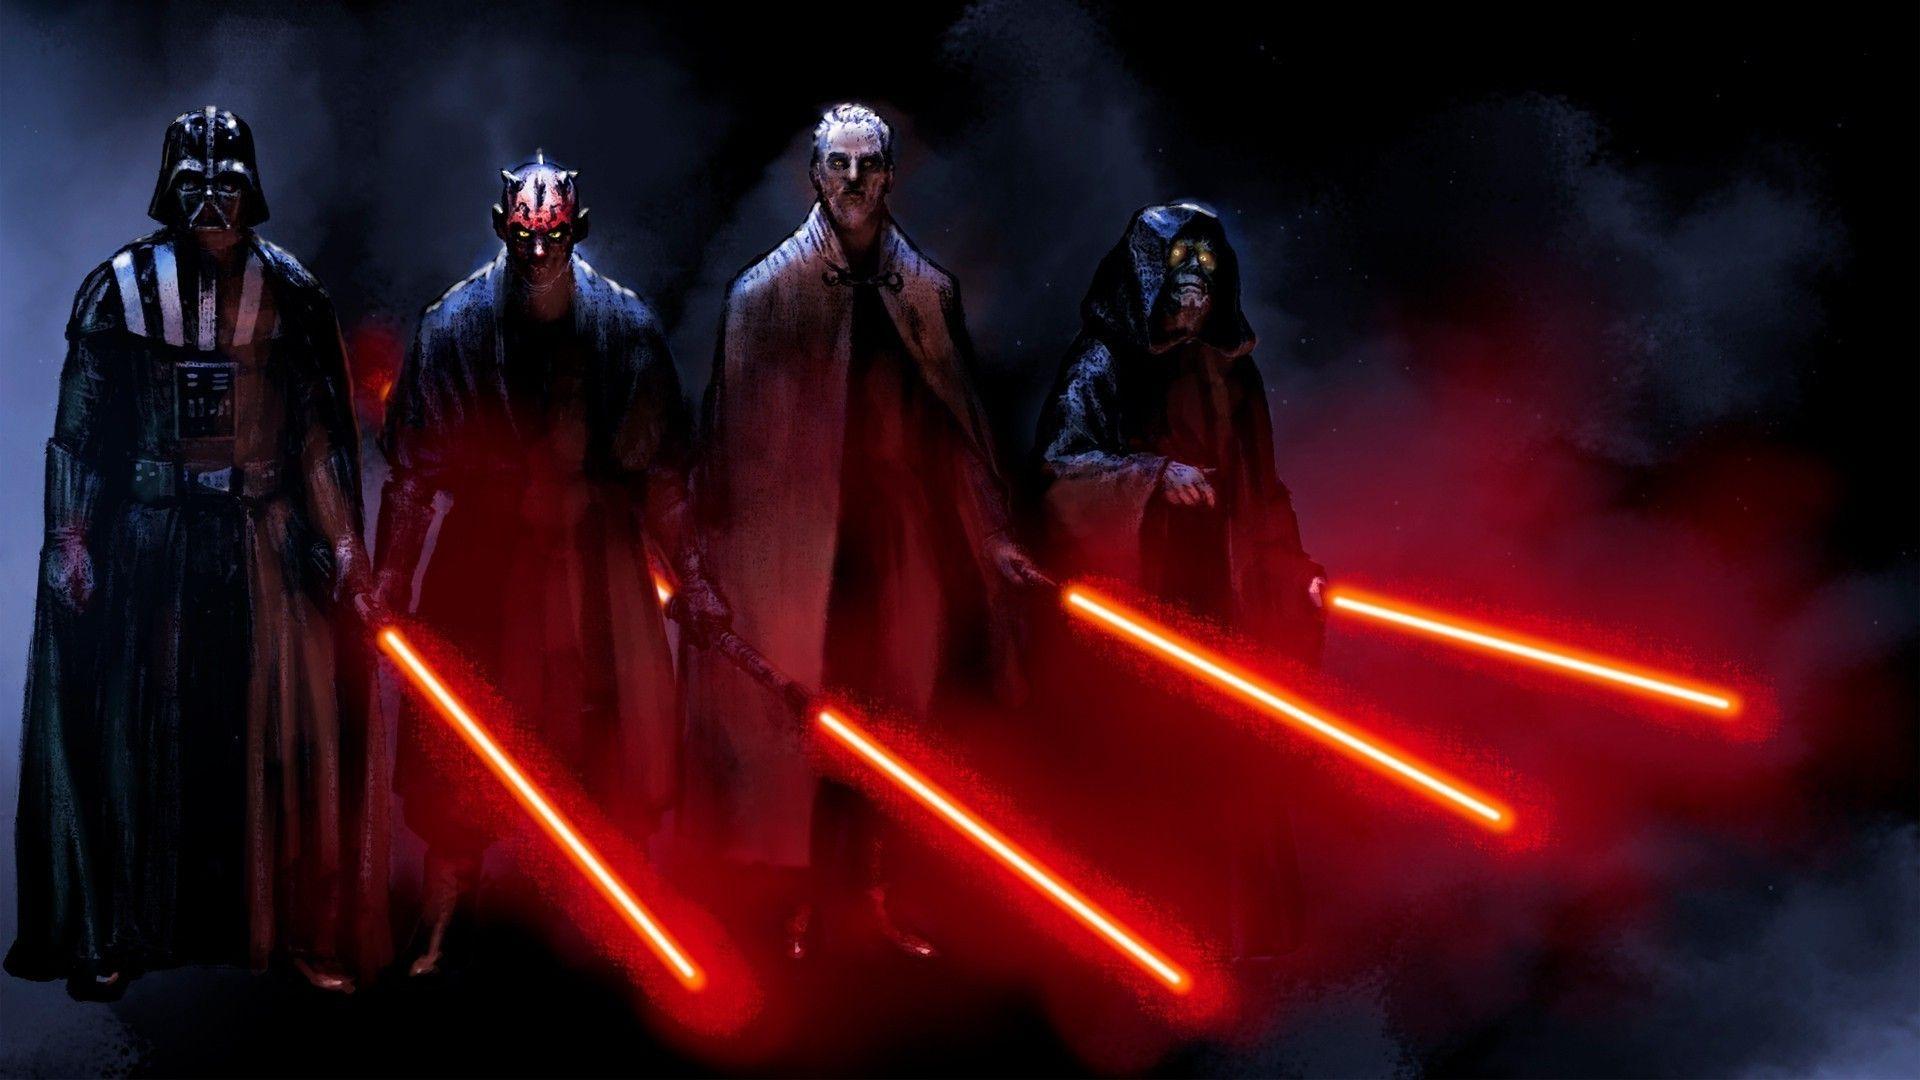 Featured image of post Sith Wallpaper 1440P at least 6500 original wallpapers hosted